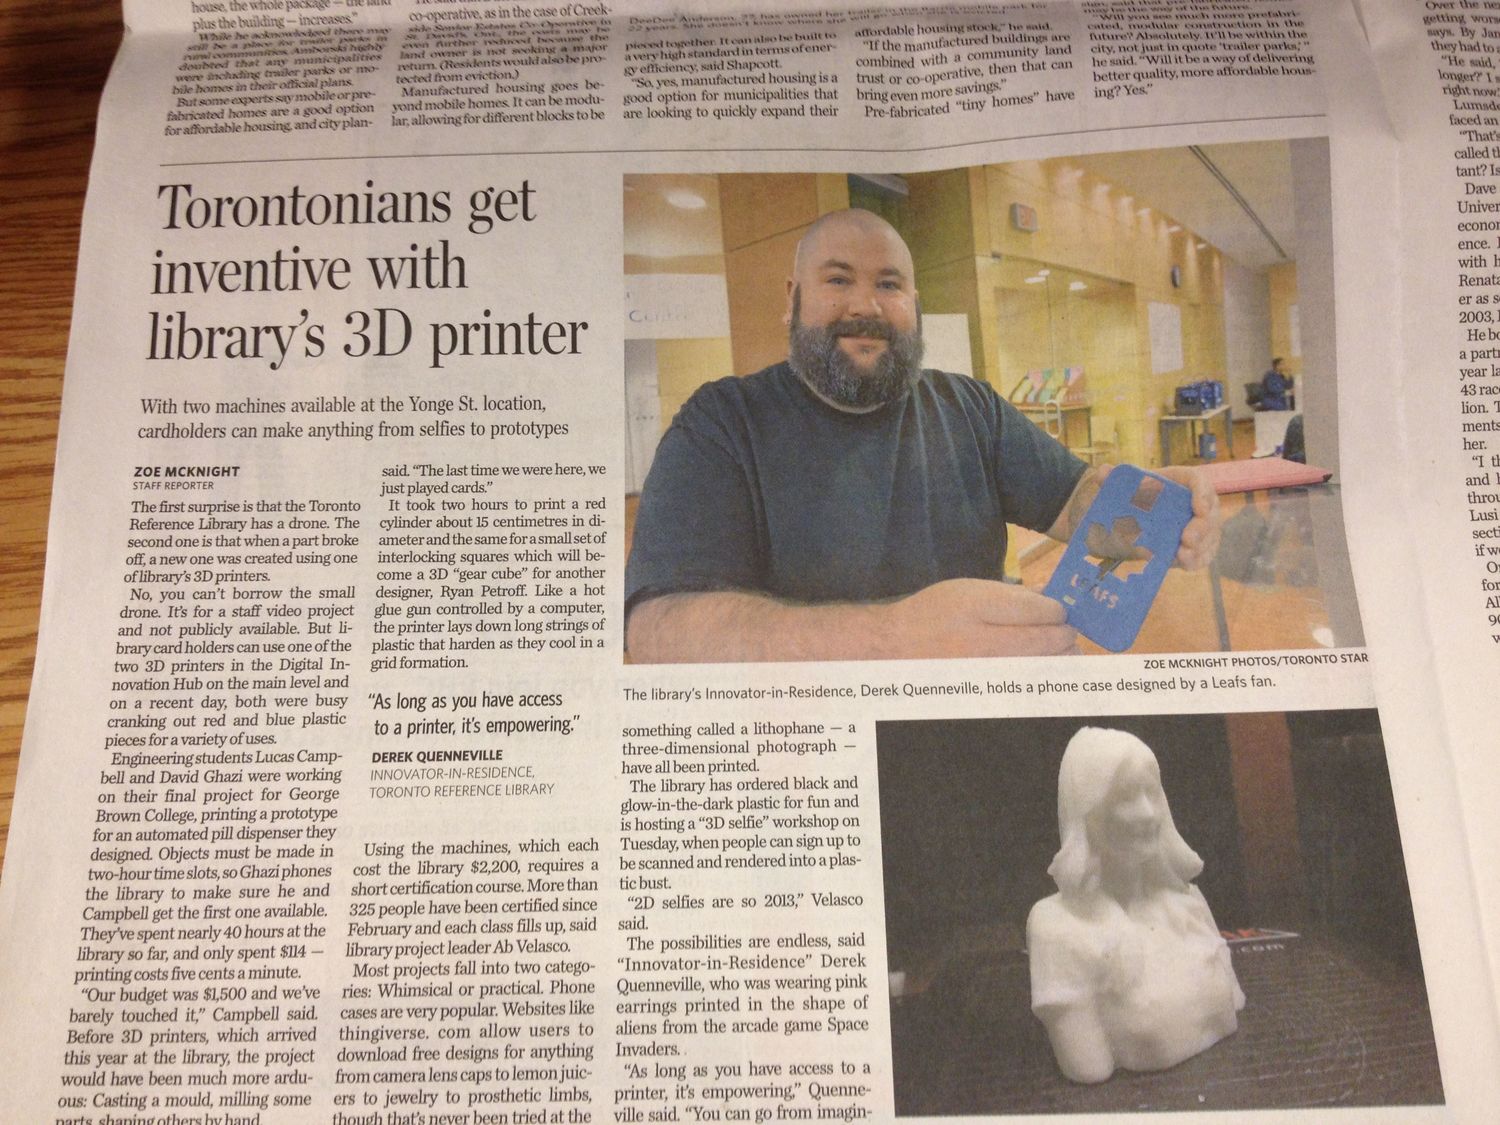 Photo of the article in print